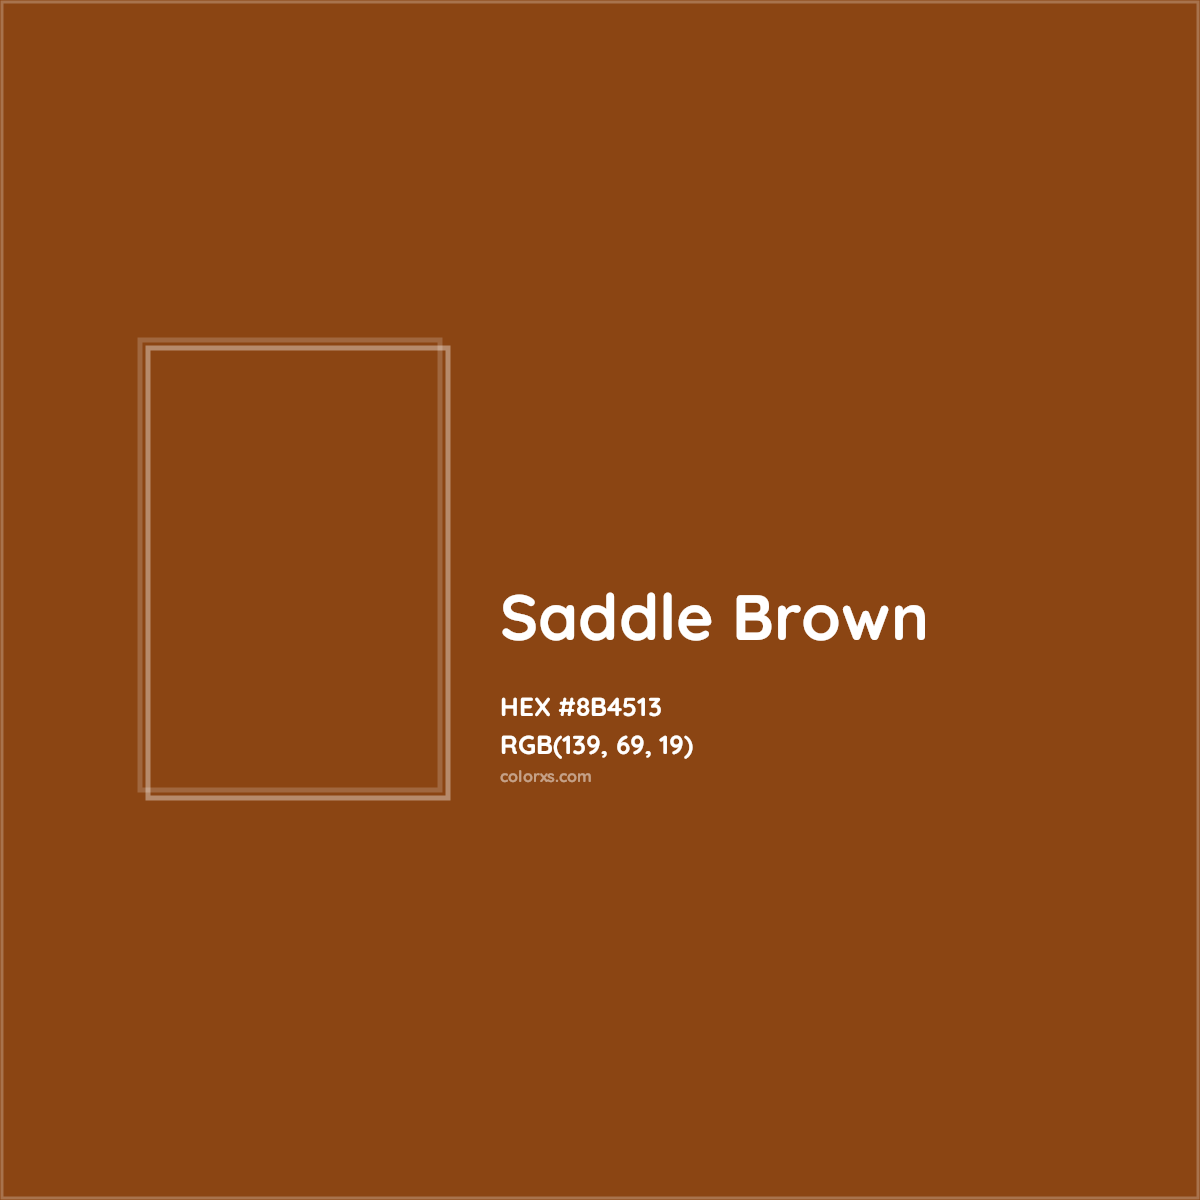 HEX #8B4513 Saddle Brown Color - Color Code